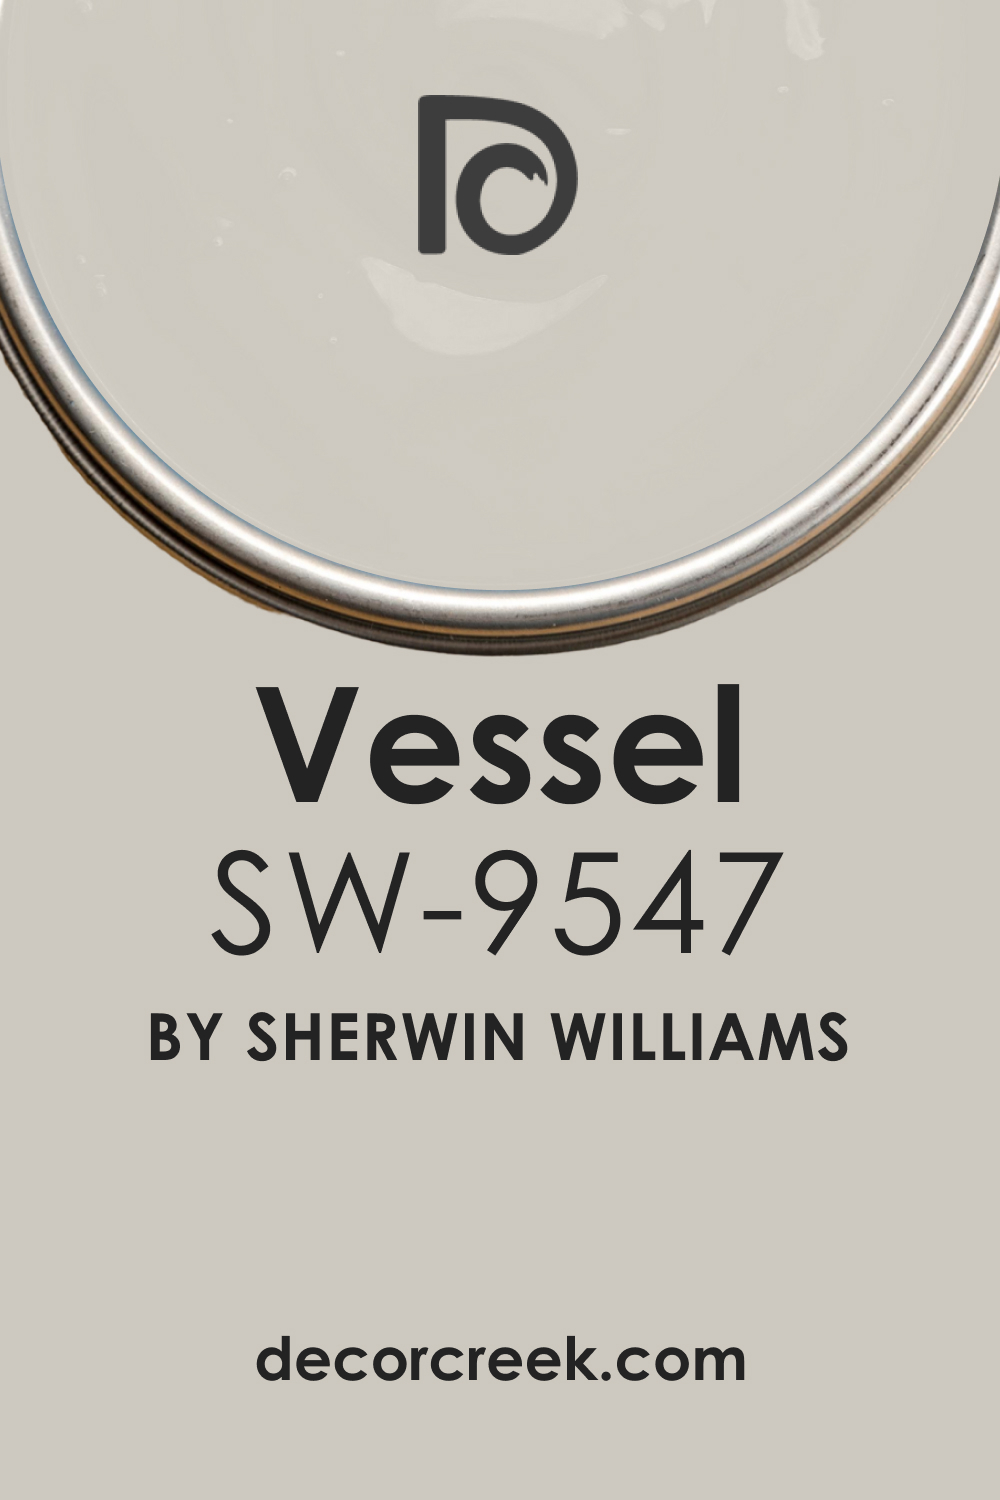 Vessel SW 9547 Paint Color by Sherwin-Williams